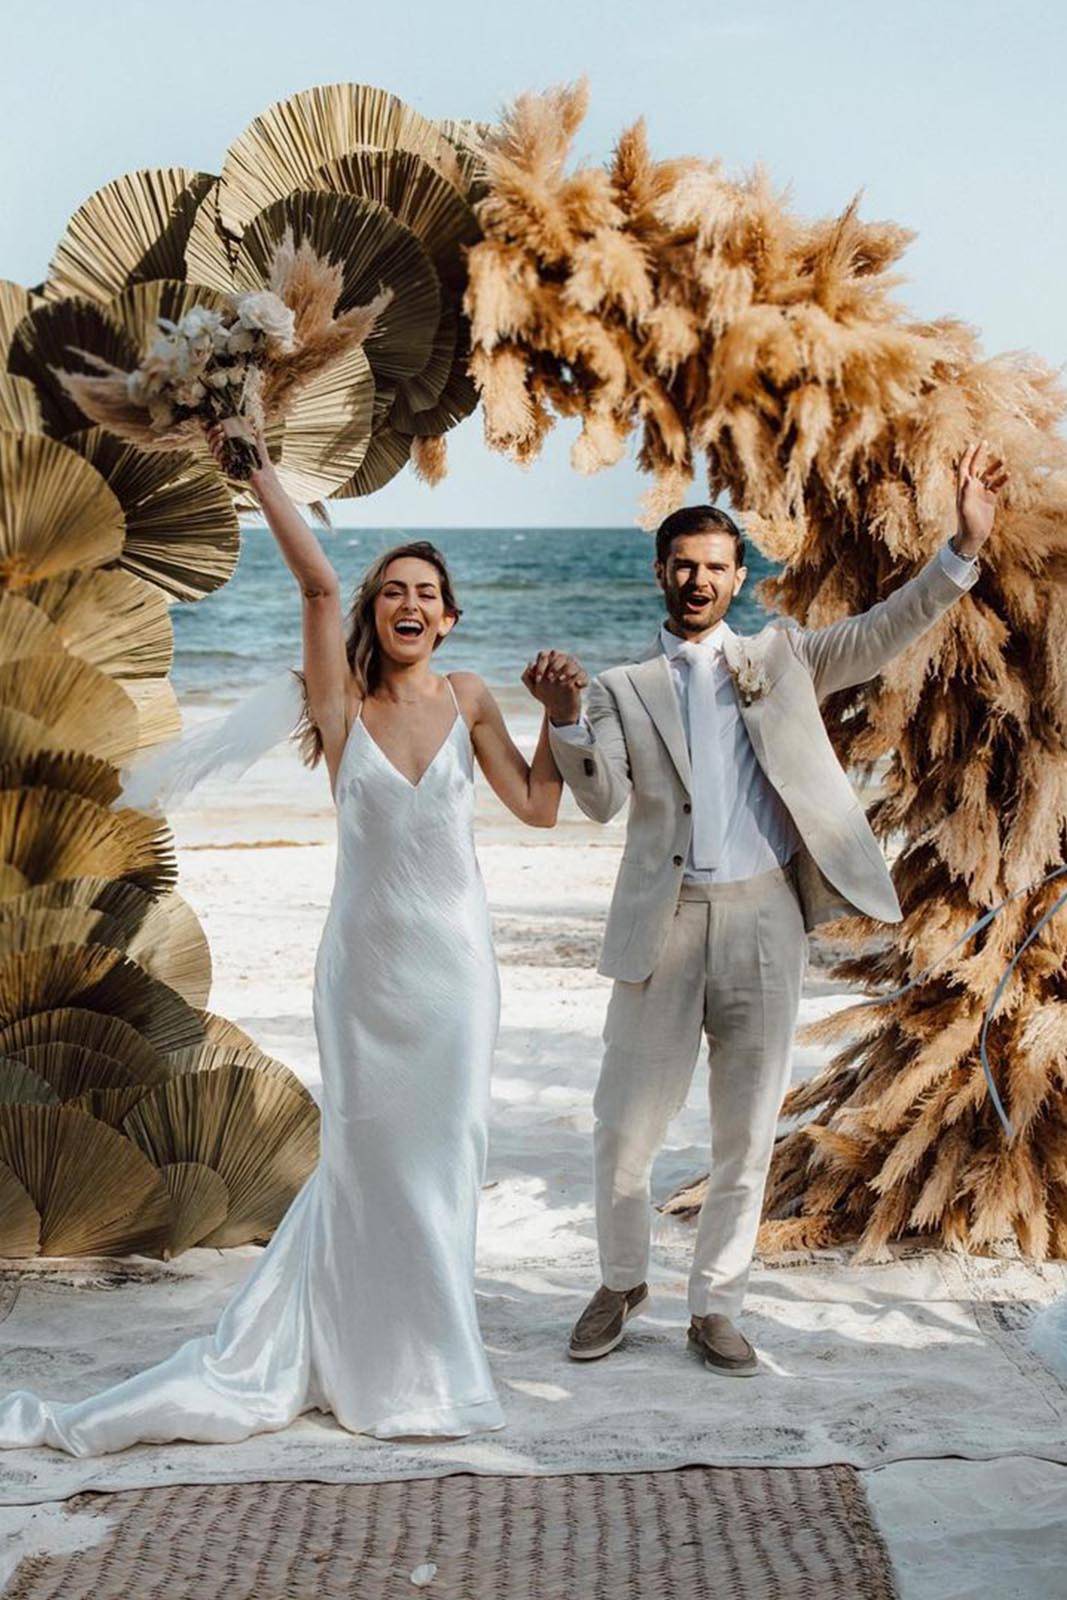 The bride and groom stand hand-in-hand with the breathtaking turquoise waters of the ocean in the background, with a stunning floral archway framing the scene.